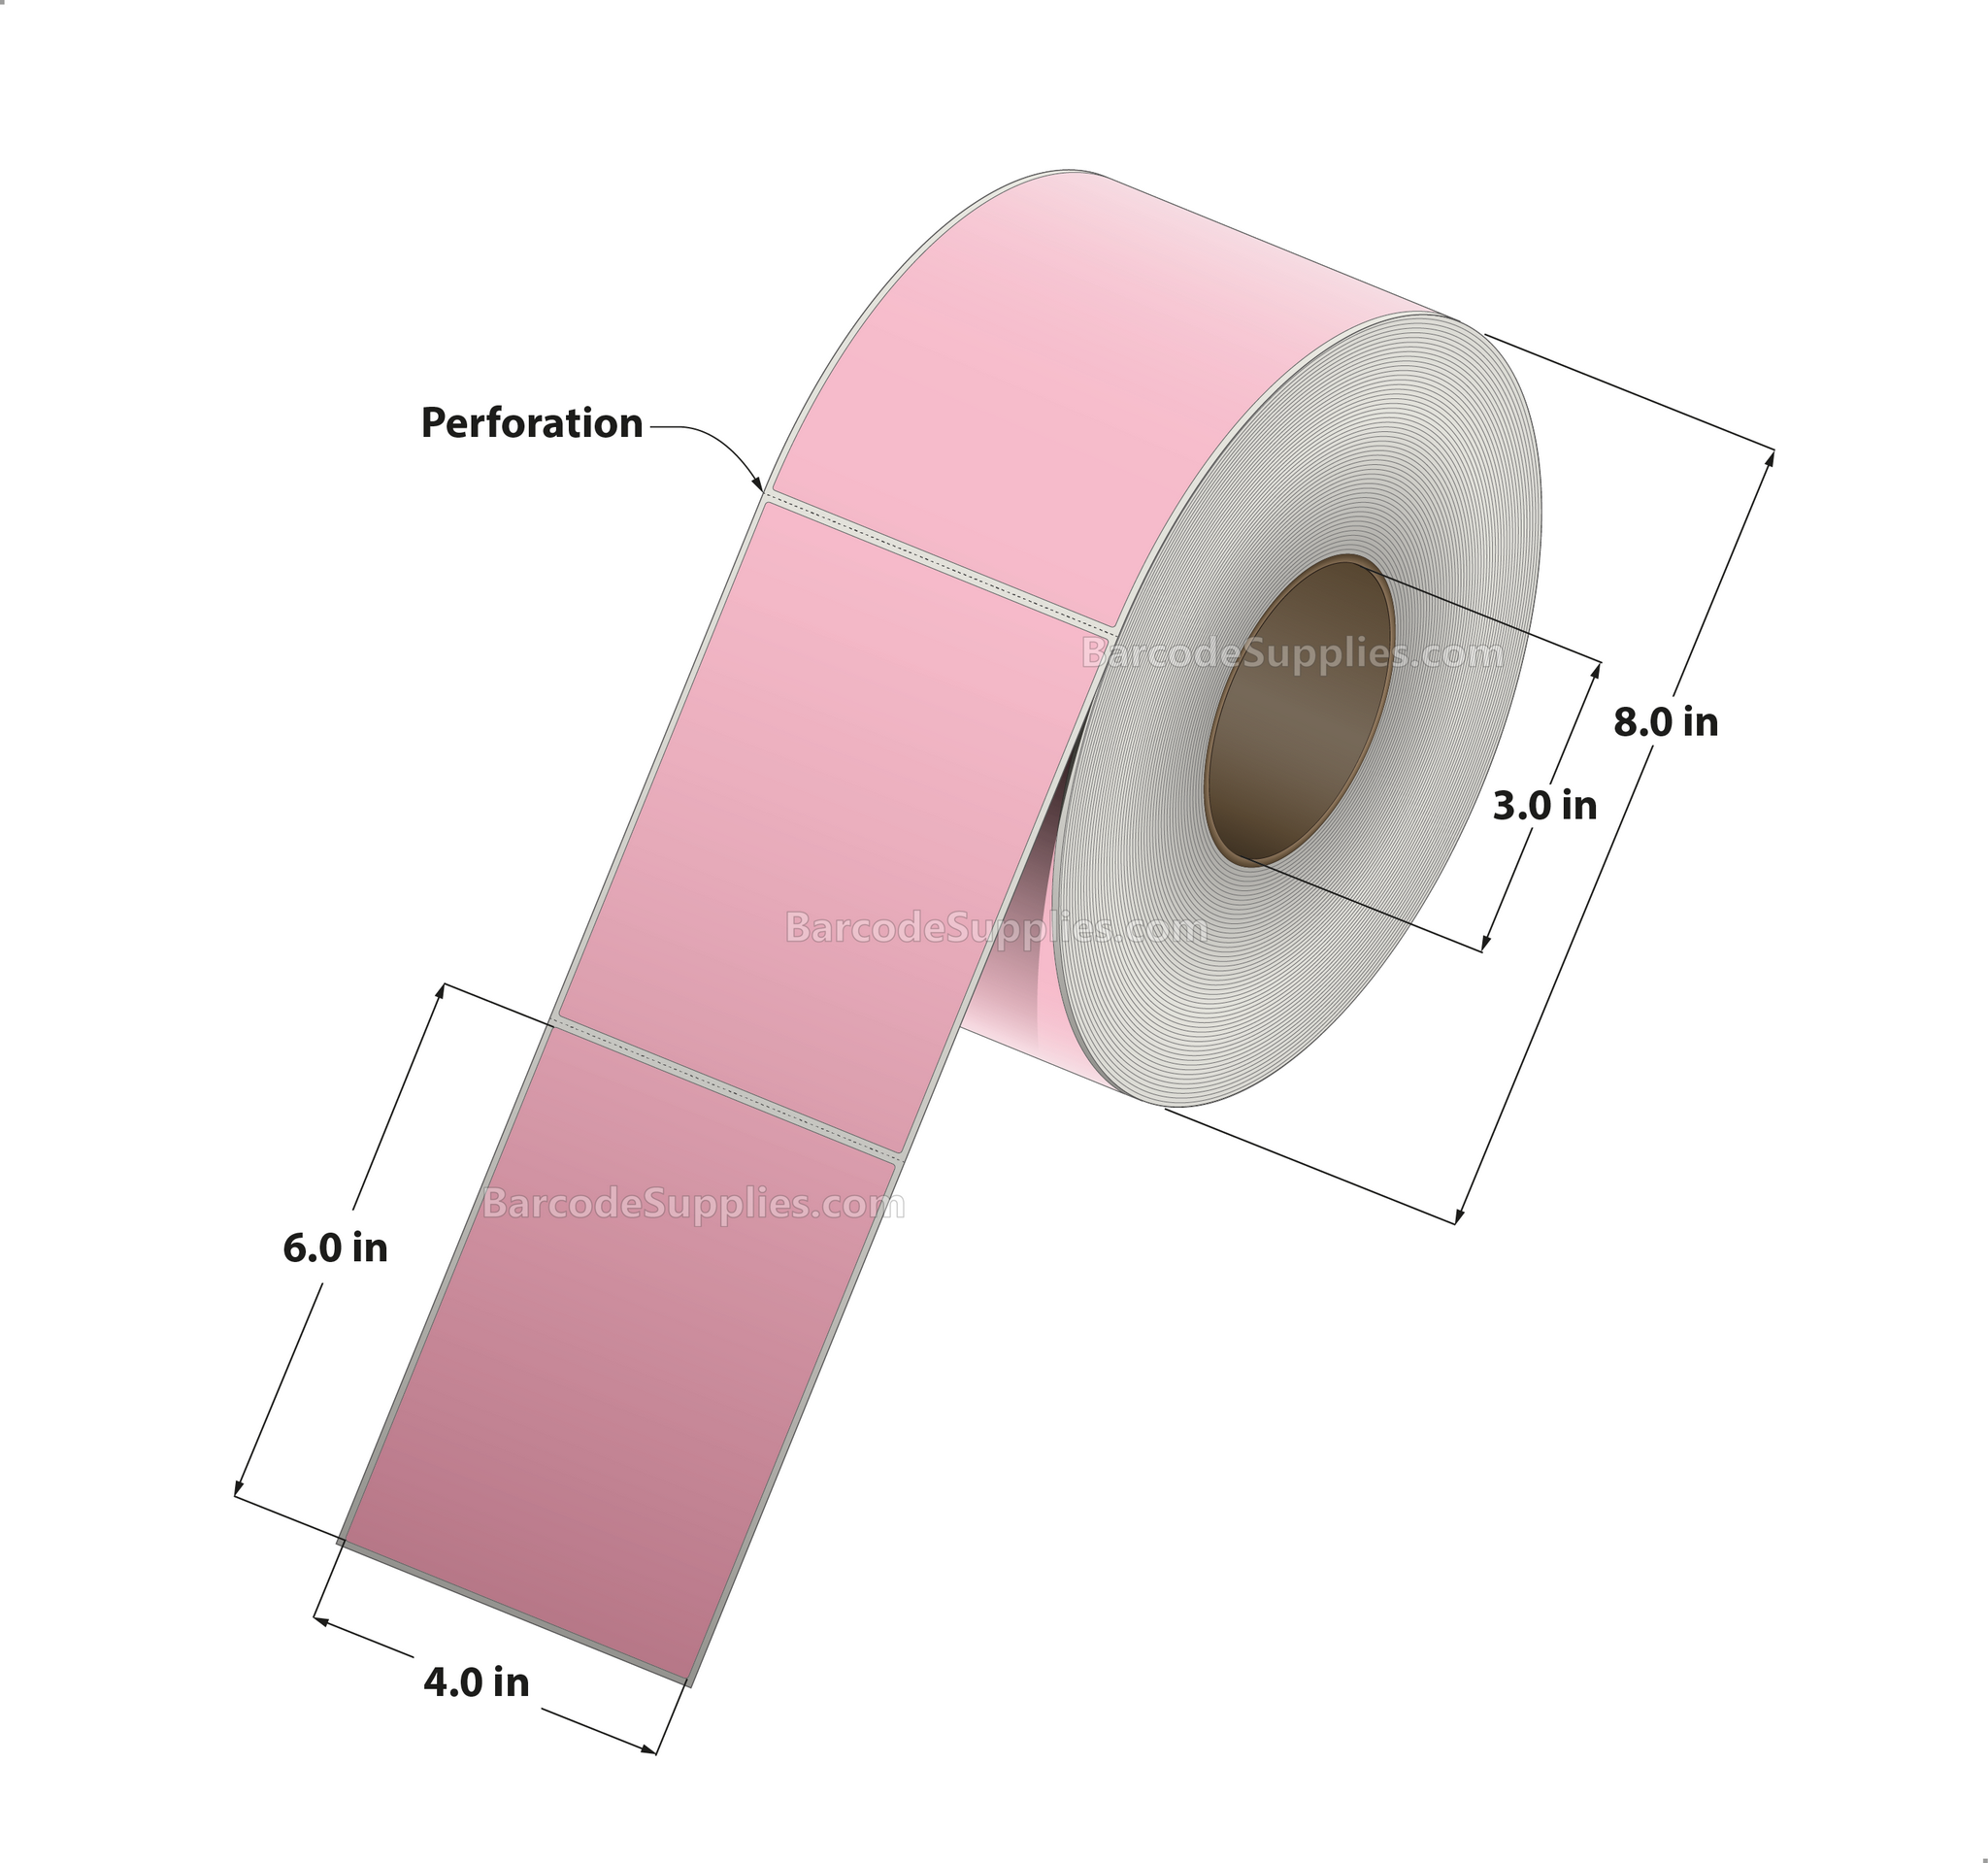 4 x 6 Thermal Transfer 176 Pink Labels With Permanent Adhesive - Perforated - 1000 Labels Per Roll - Carton Of 4 Rolls - 4000 Labels Total - MPN: RFC-4-6-1000-PK